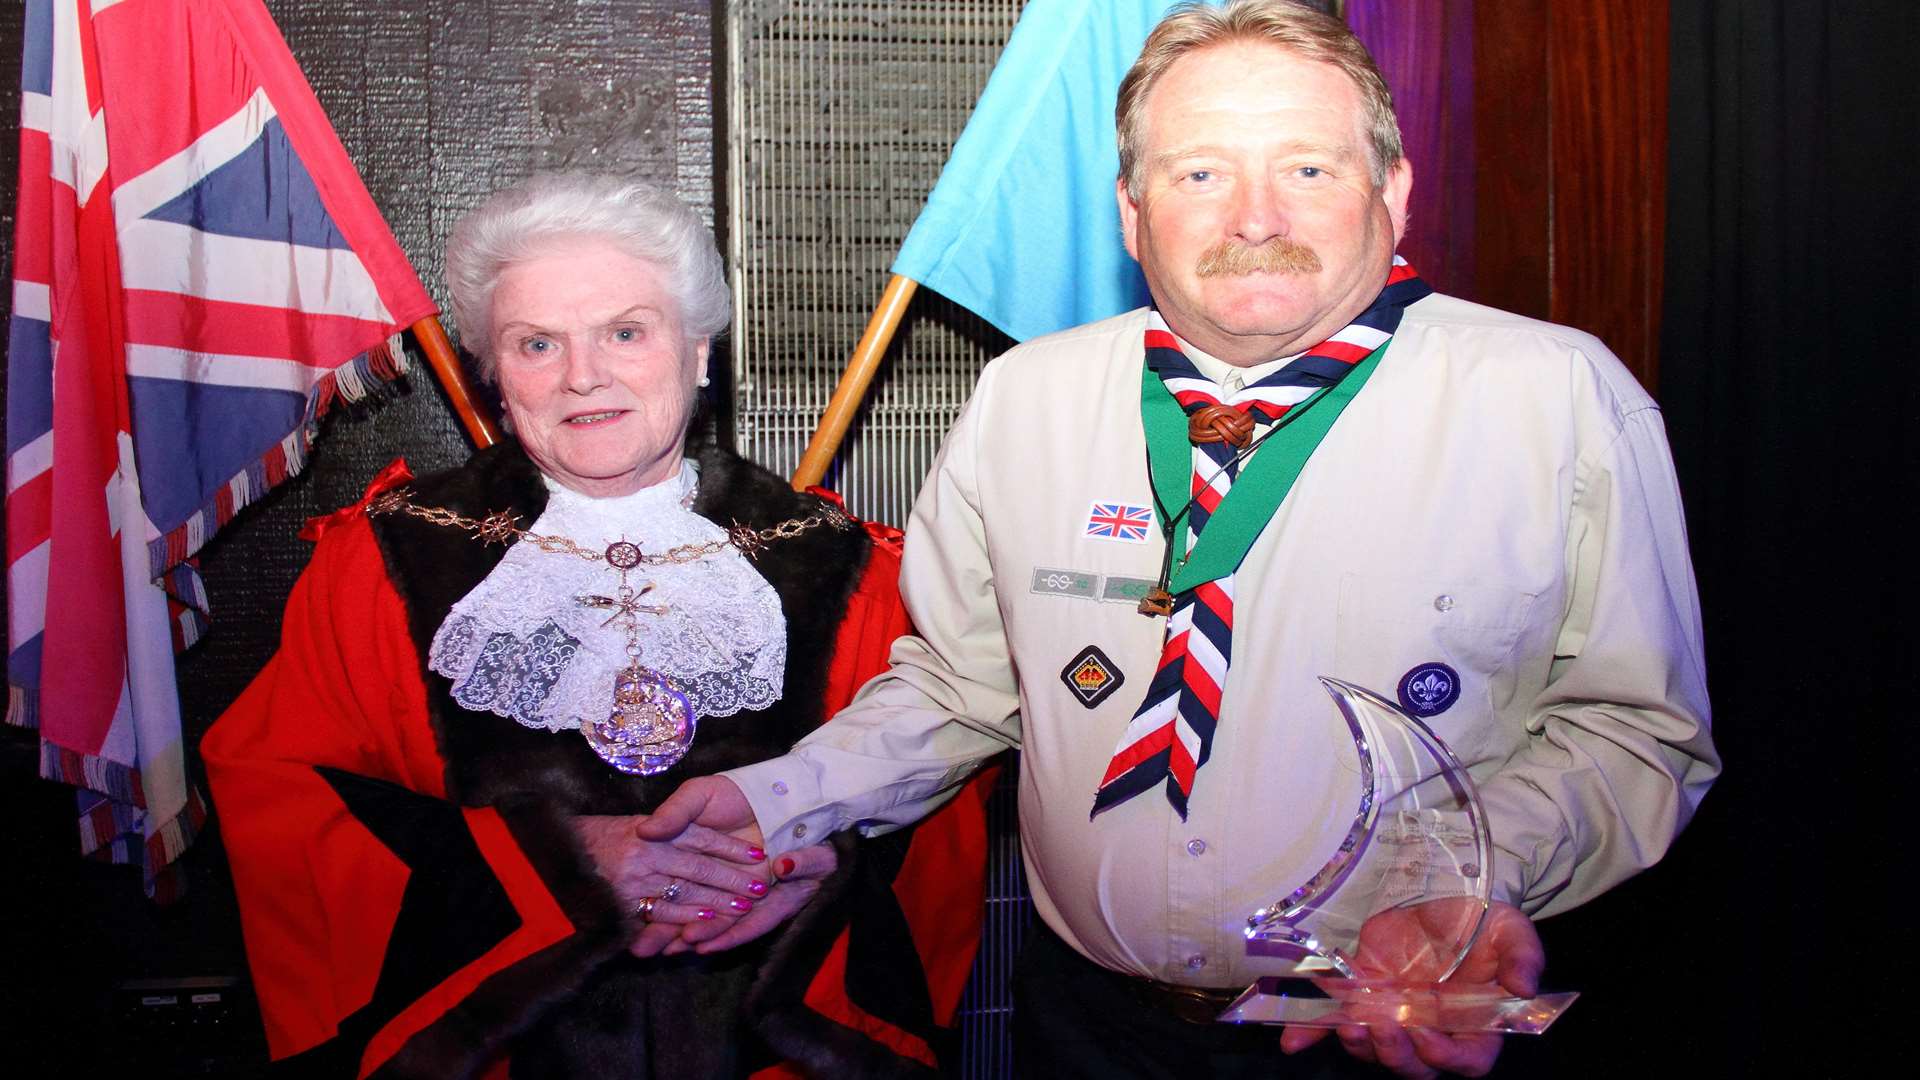 Andrew Martin won his award for working tirelessly for 40 years through scouting. Picture: Gravesham Borough Council